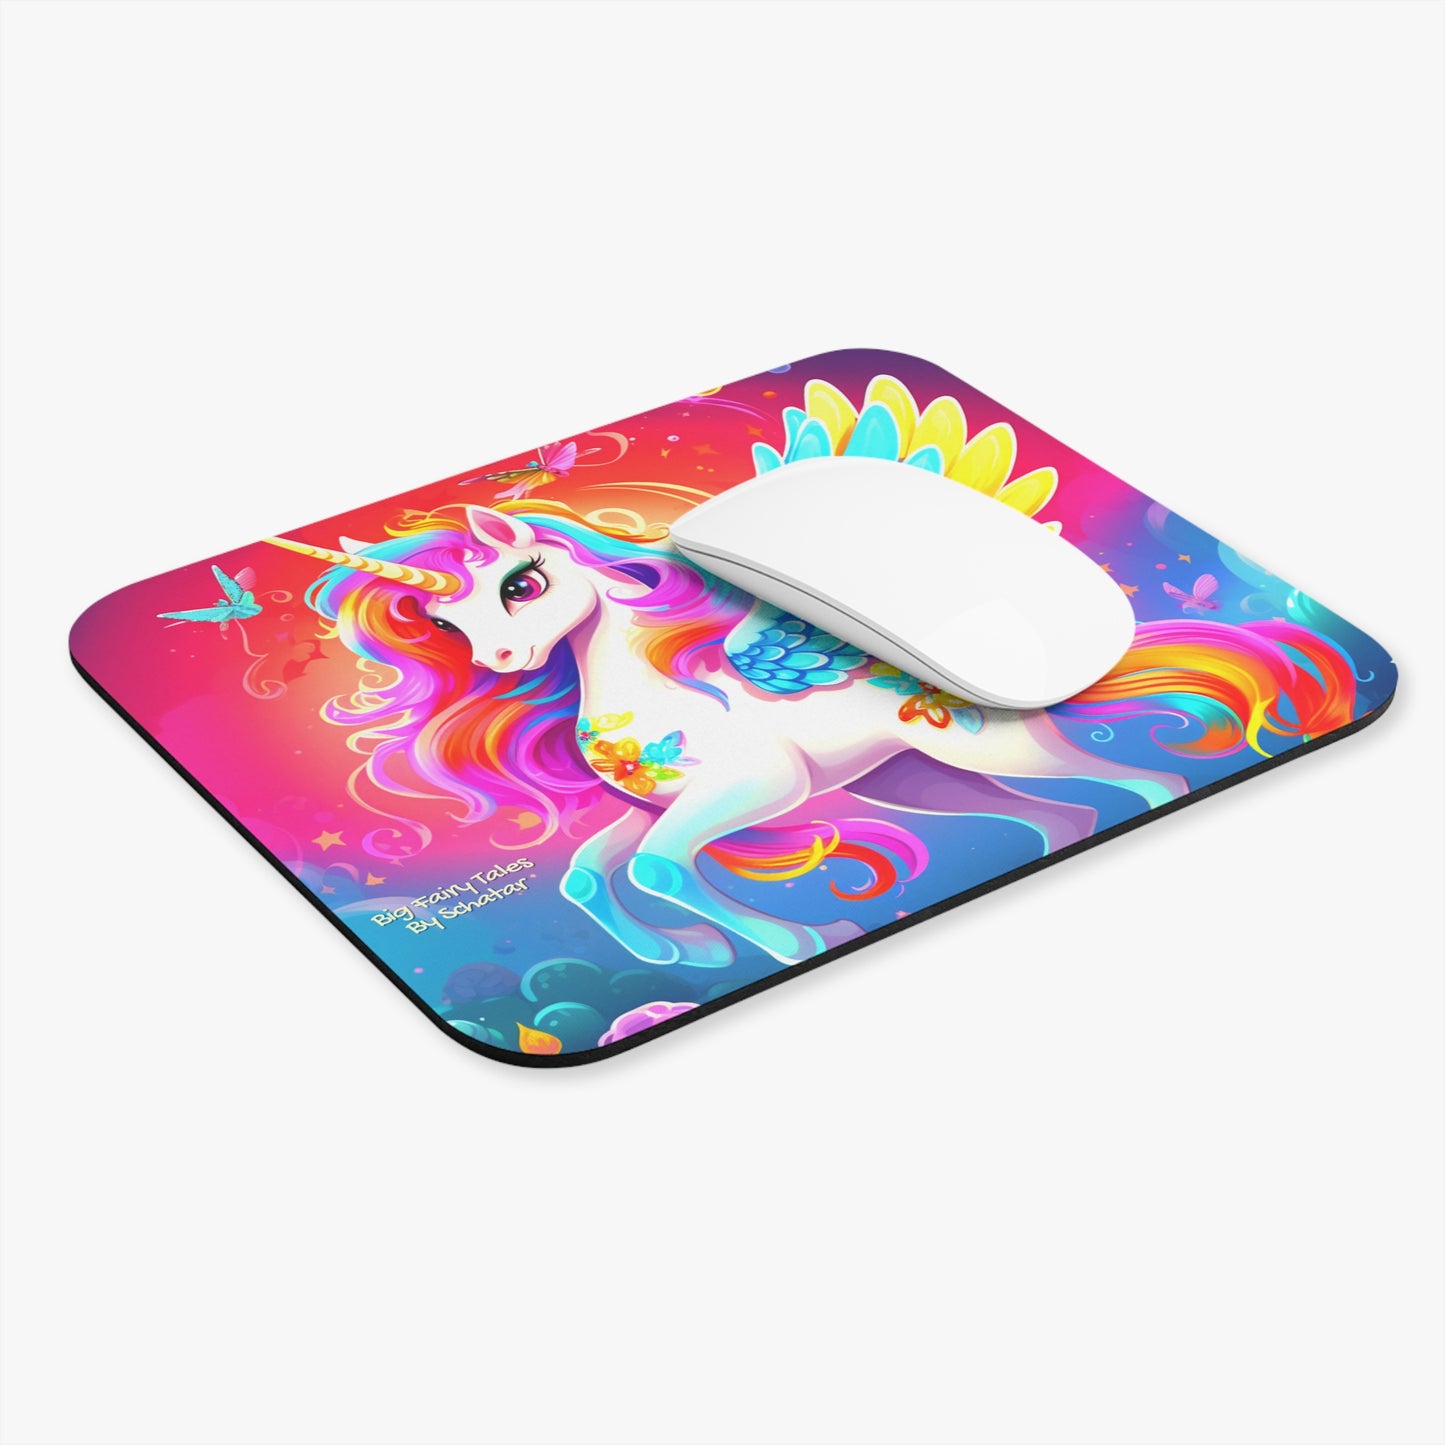 Rainbow Unicorn Mouse Pad From Big Fairy Tales By Schatar